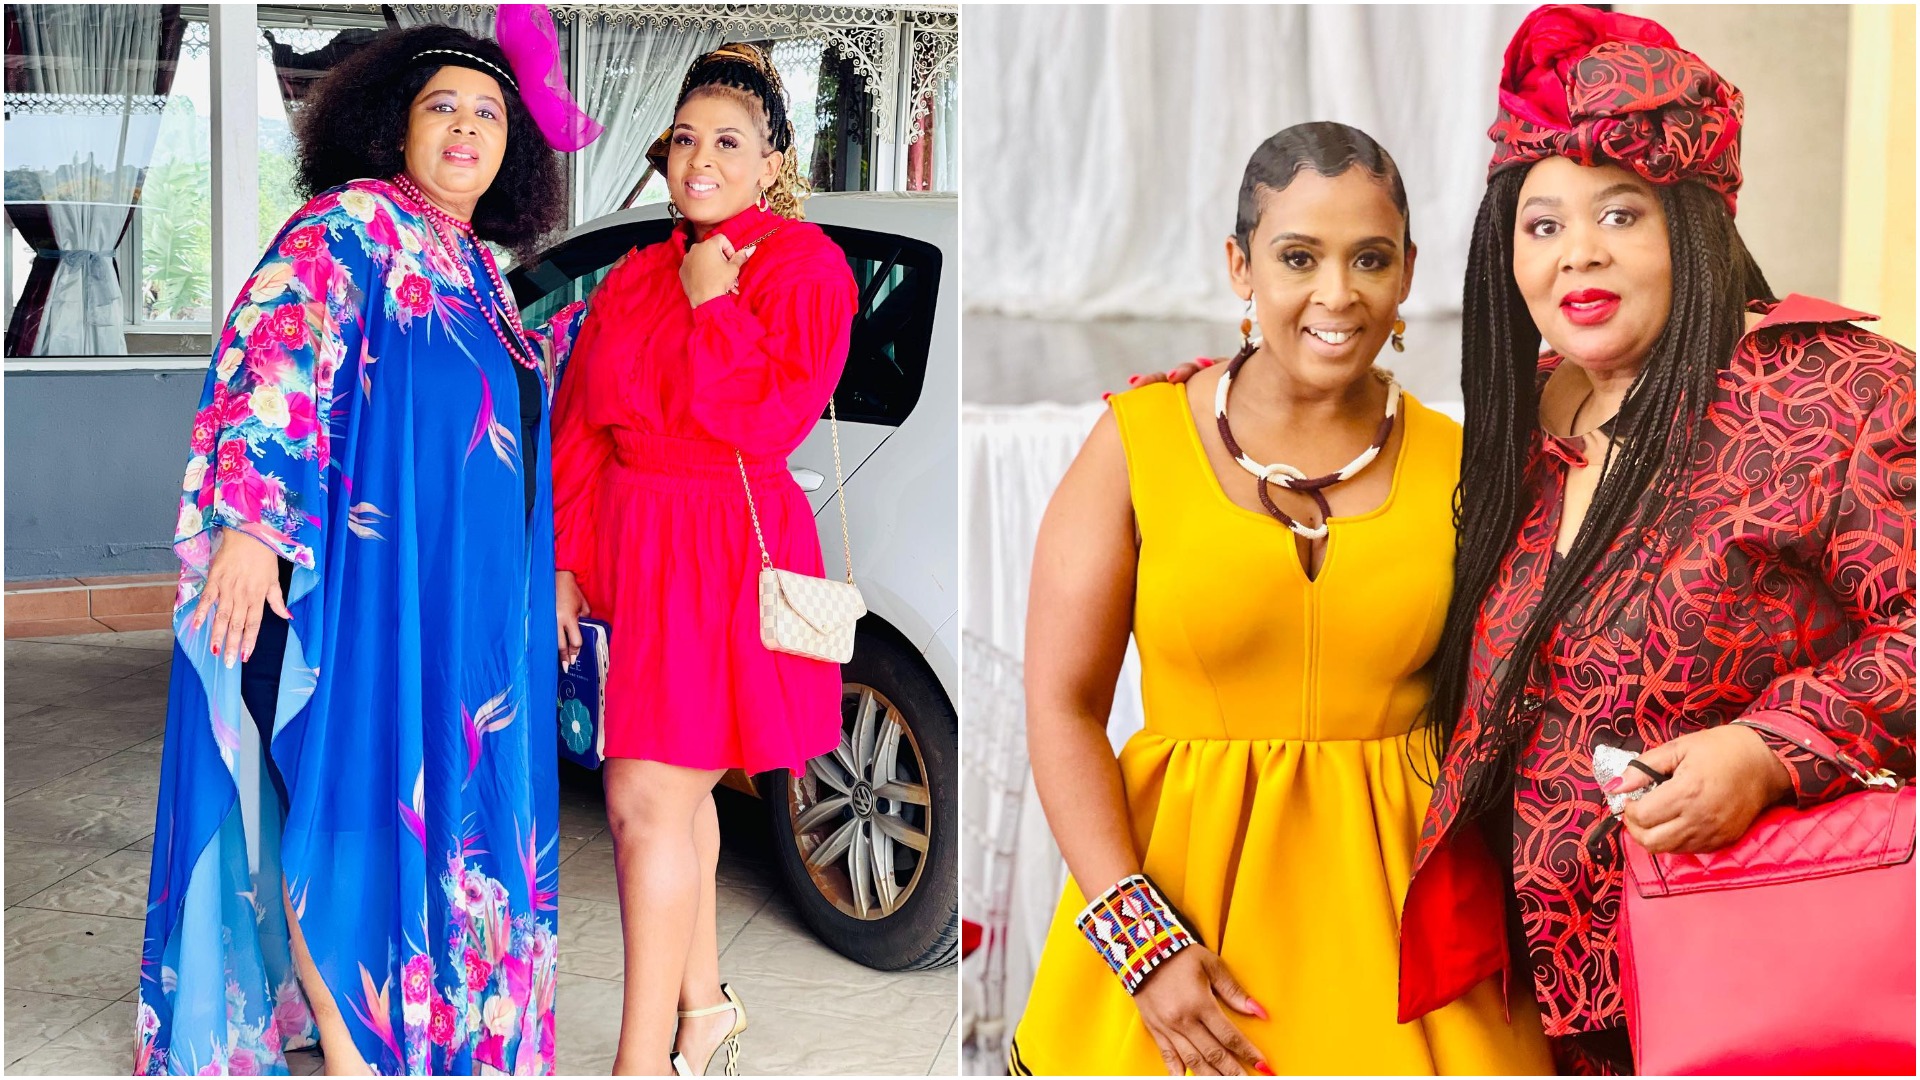 “Enough is Enough” - RHOD Star Nonku Williams Fires Back As Social Media Calls For Her & Mom To Leave Show